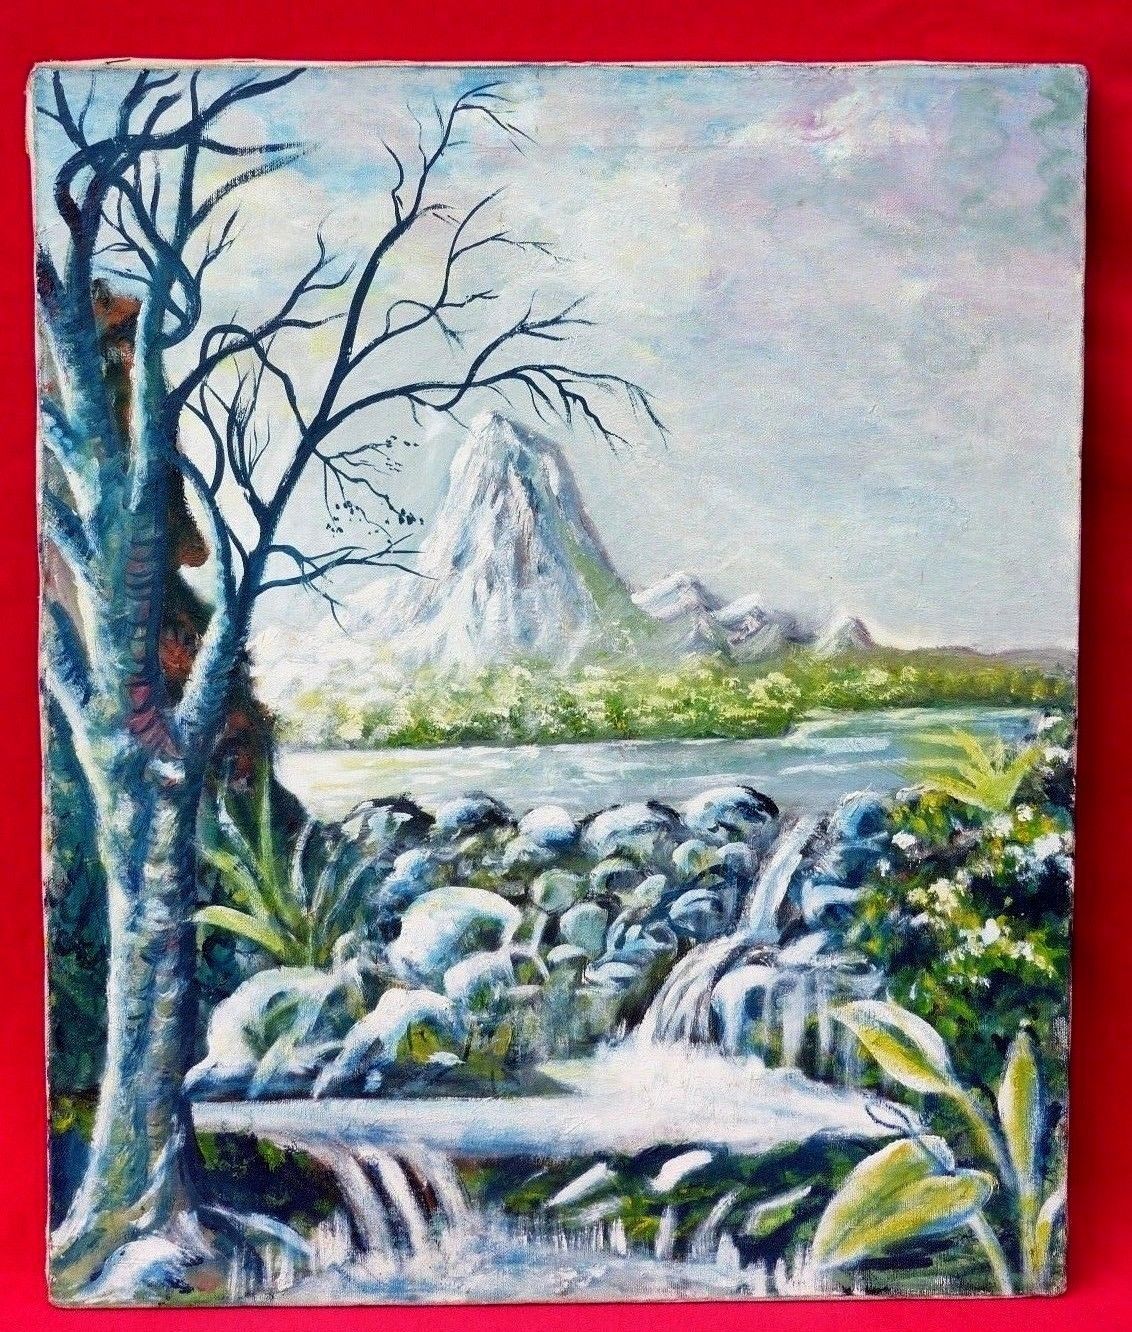 Primary image for VINTAGE OIL PAINTING MATTAHORN MOUNTAIN? RIVER WATER ROCKS WATERFALL SIGNED ART